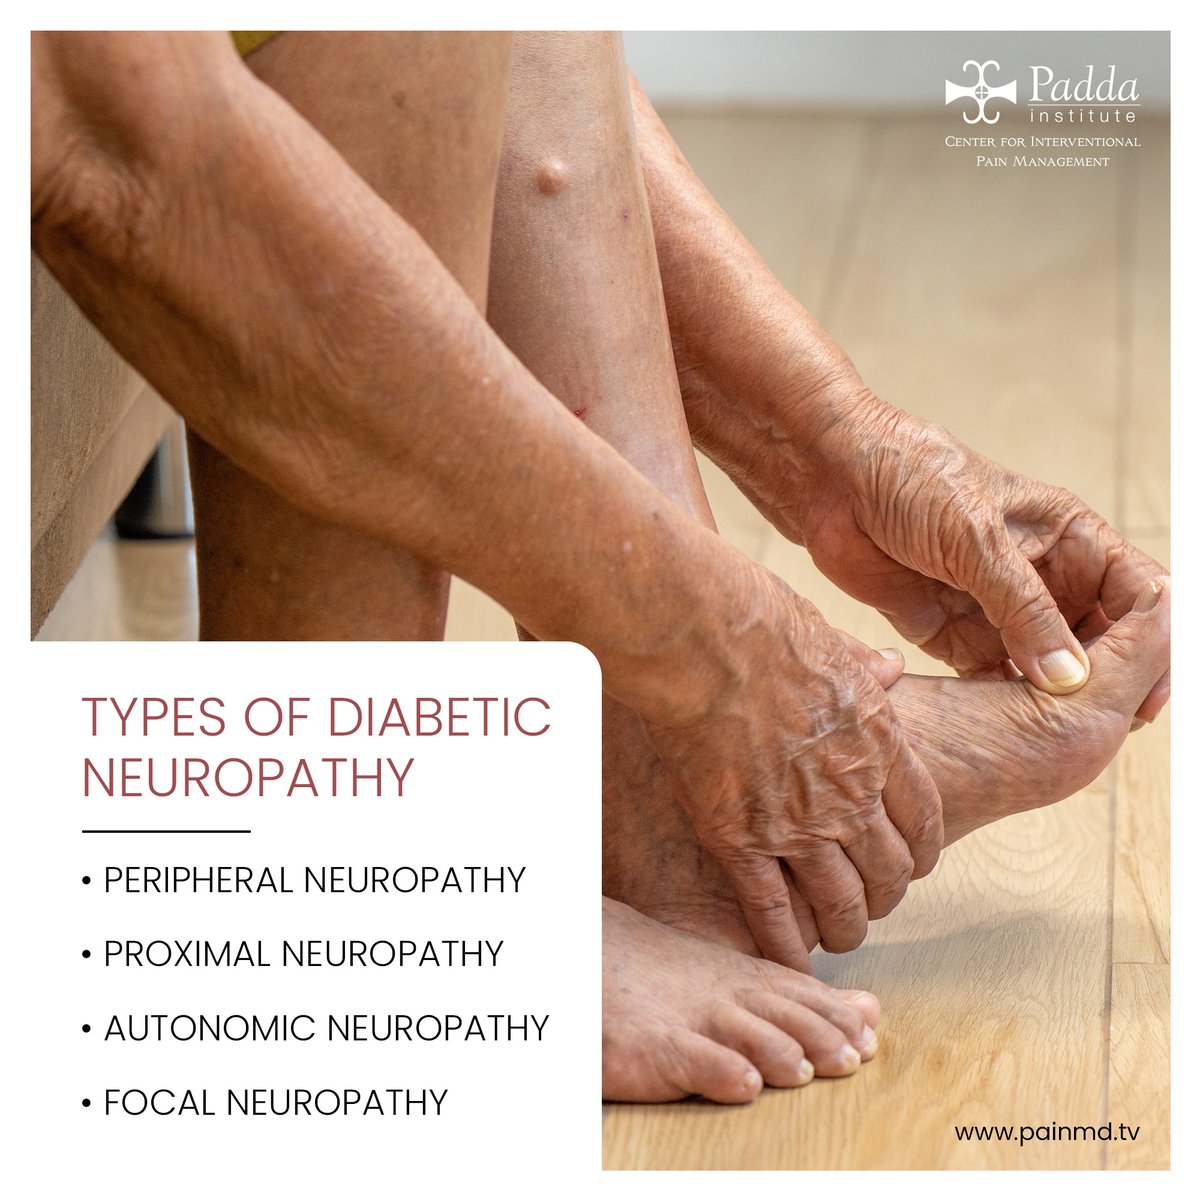 At the Padda Institute, we have the best pain management specialists who provide diabetic neuropathy treatment to our patients and recovery from diabetic neuropathy.

For more information, get in touch with us today!

shorturl.at/cmOX4

#diabeticperipheralneuropathy